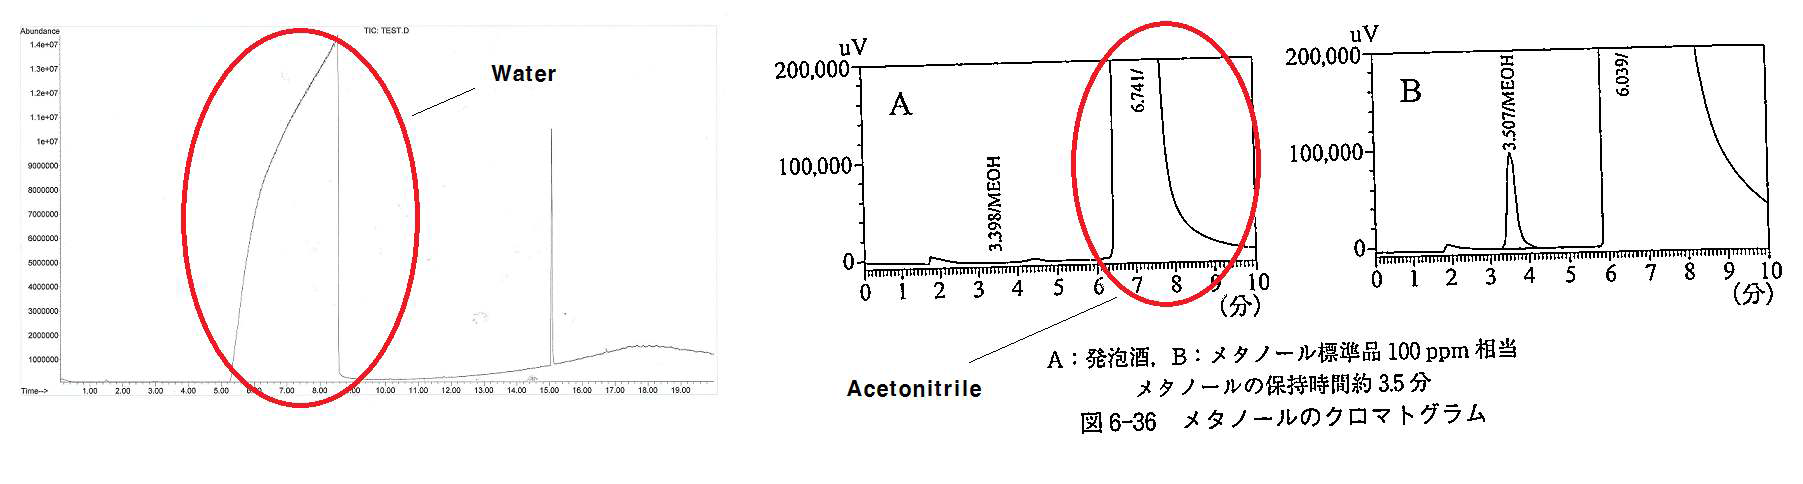 Interferences of water and acetonitrile for 5 kinds of alcohol compounds using Gas-chromatography.